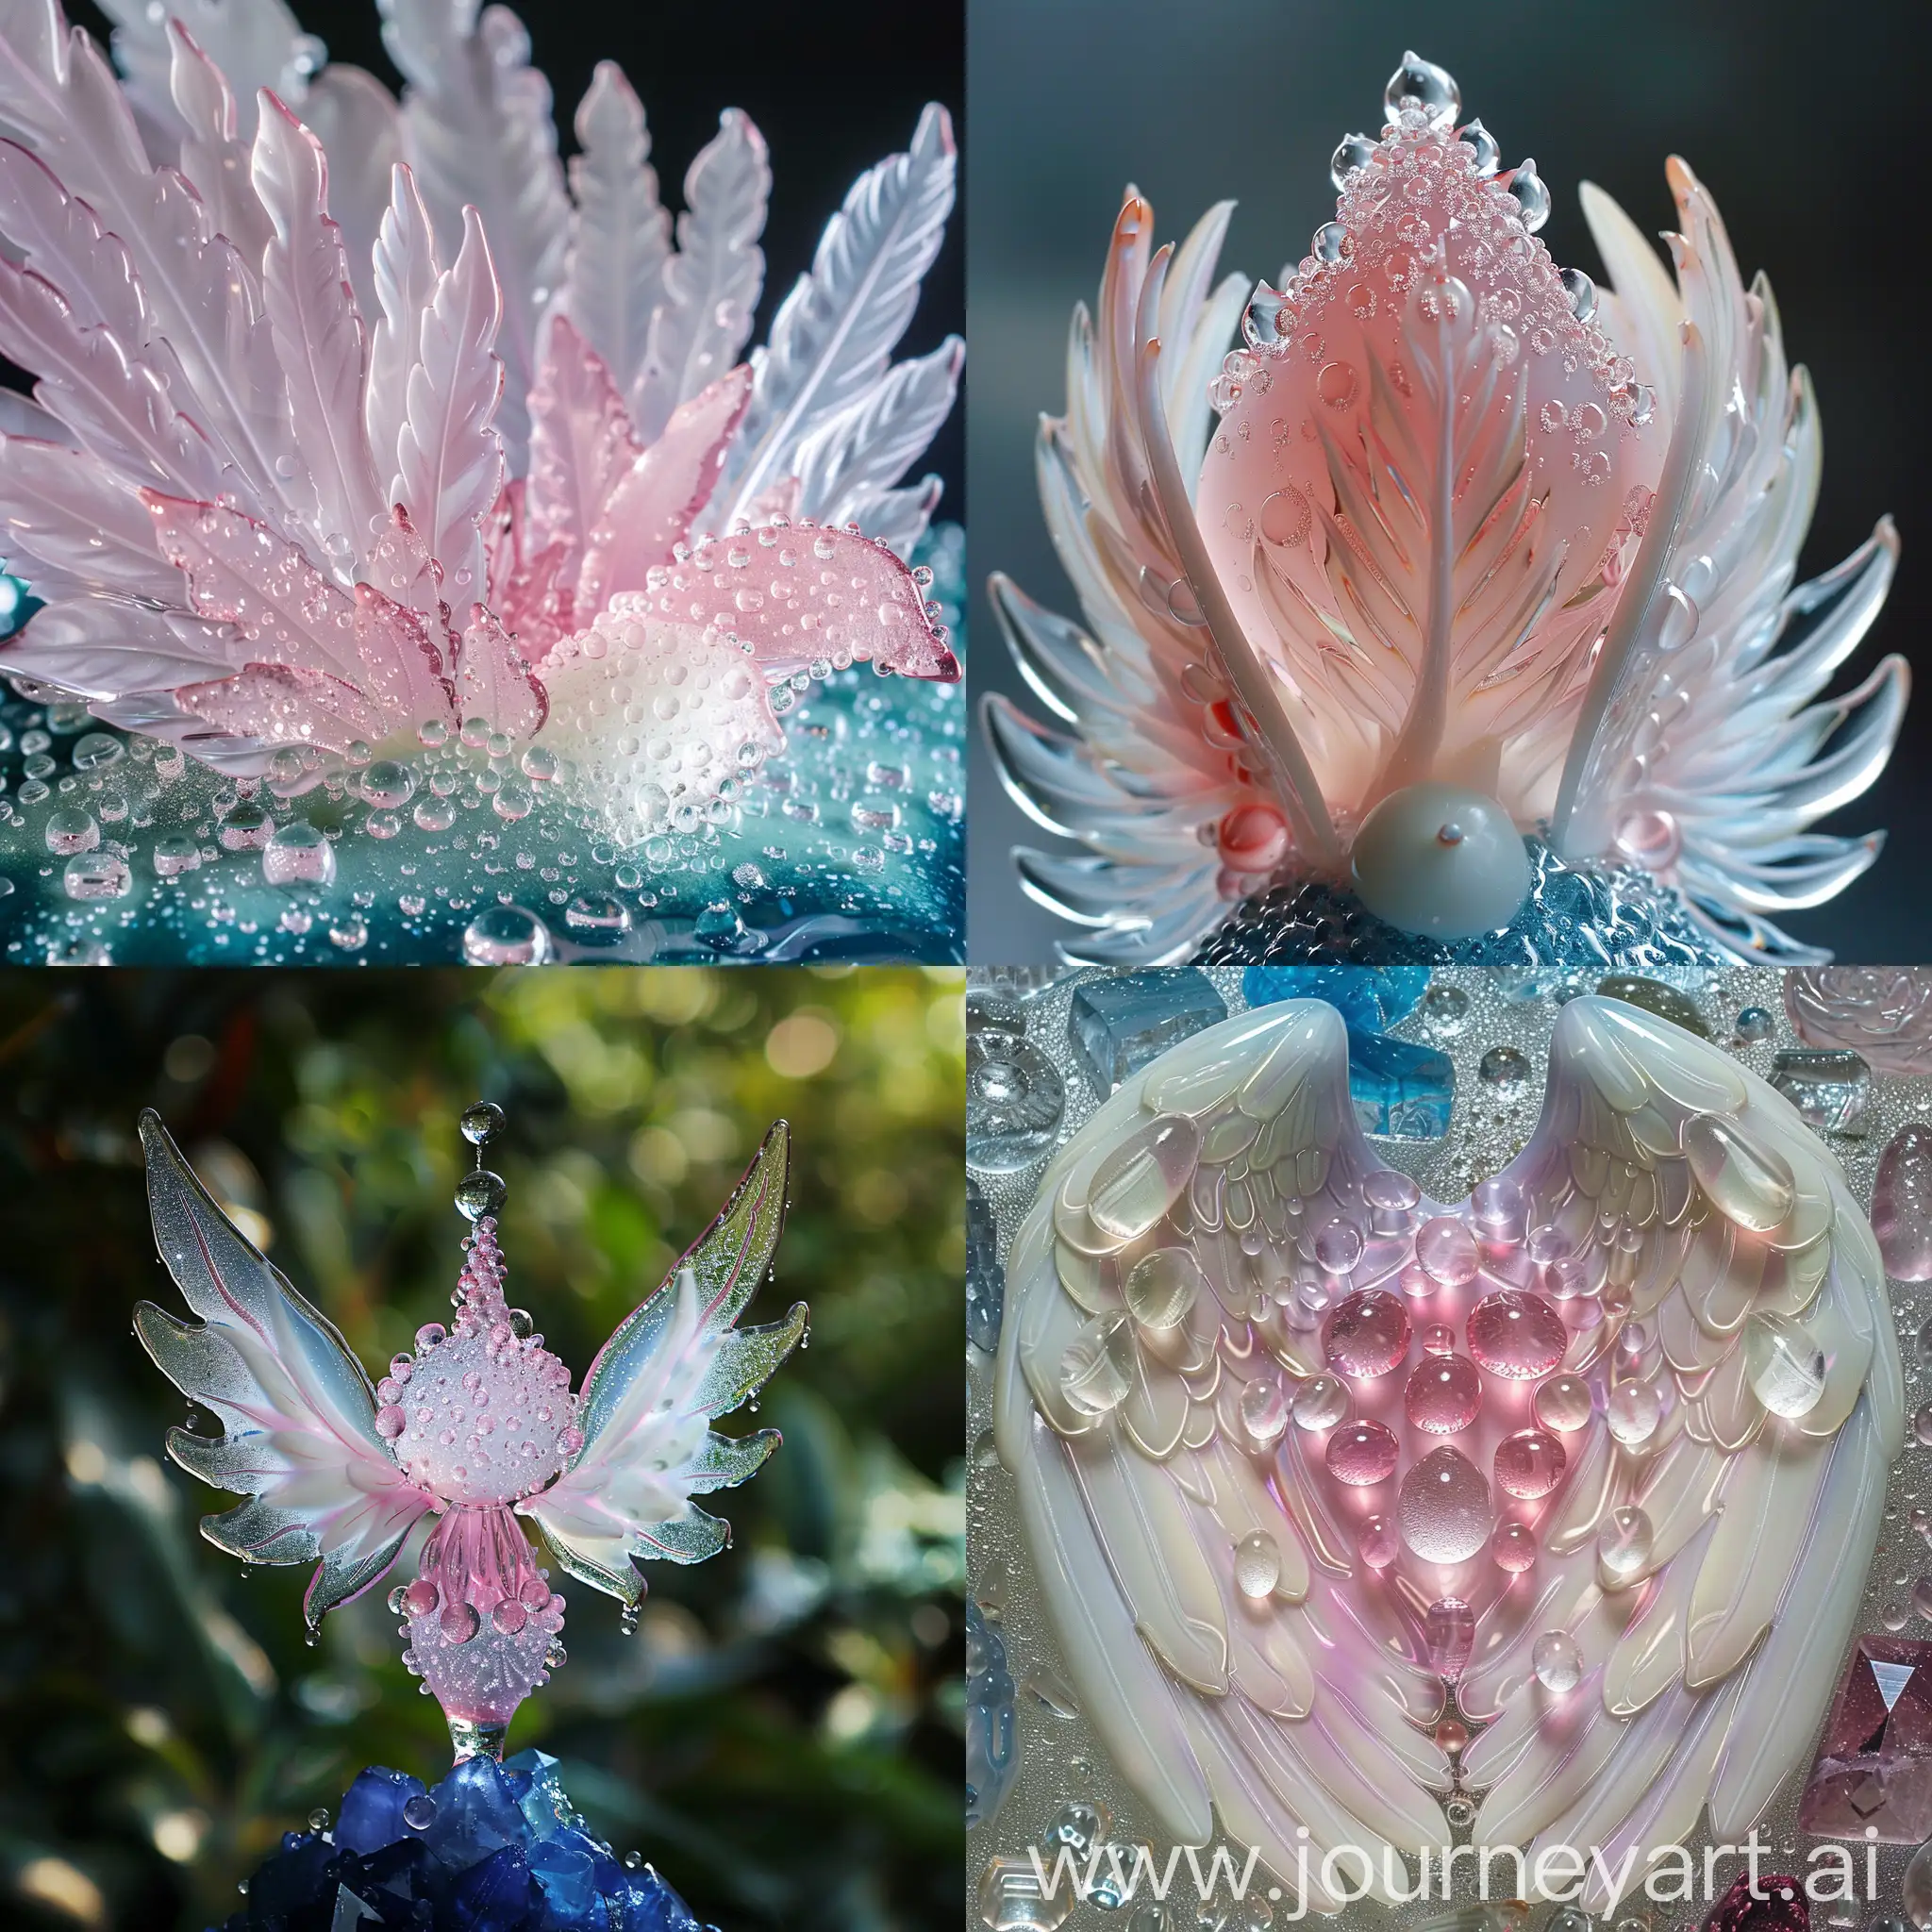 Ethereal-Angel-Wings-in-Pink-Dew-Drops-Serene-Glass-Art